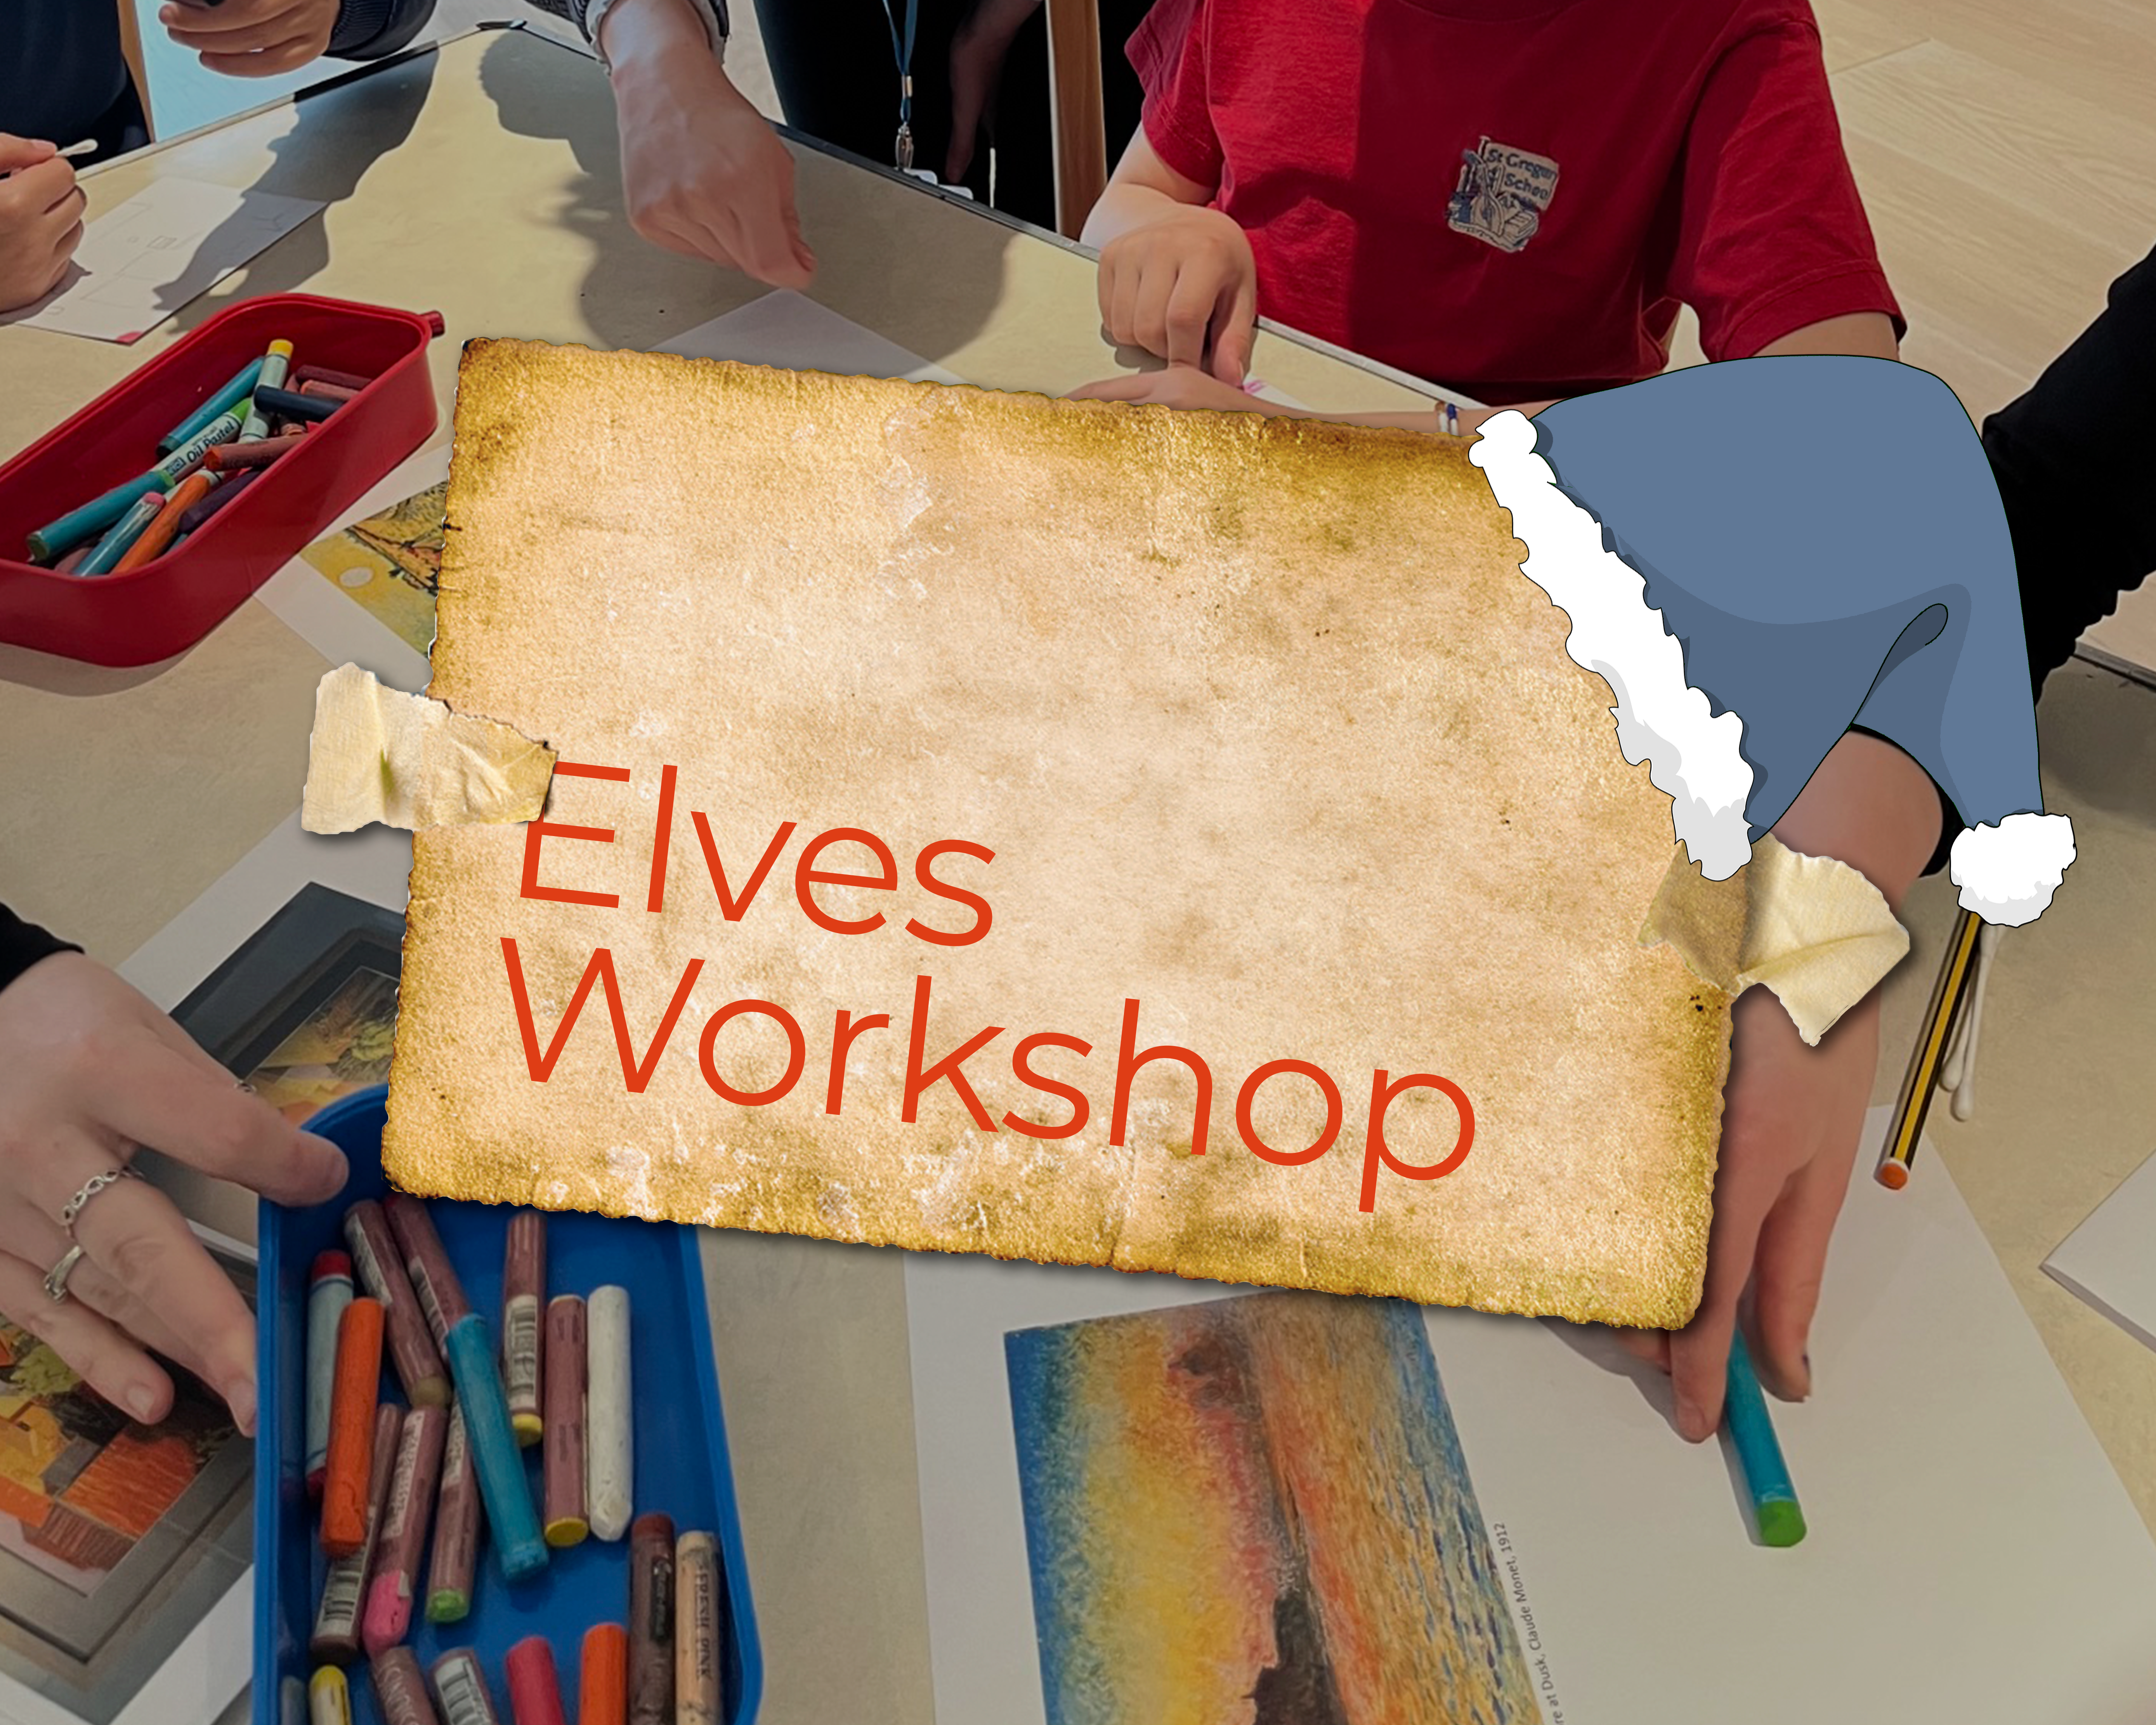 An image of young people drawing with pastels. Overlayed is a piece of paper with the words 'Elves Workshop' on it. There is a blue elf's hat on the corner of the overlay.